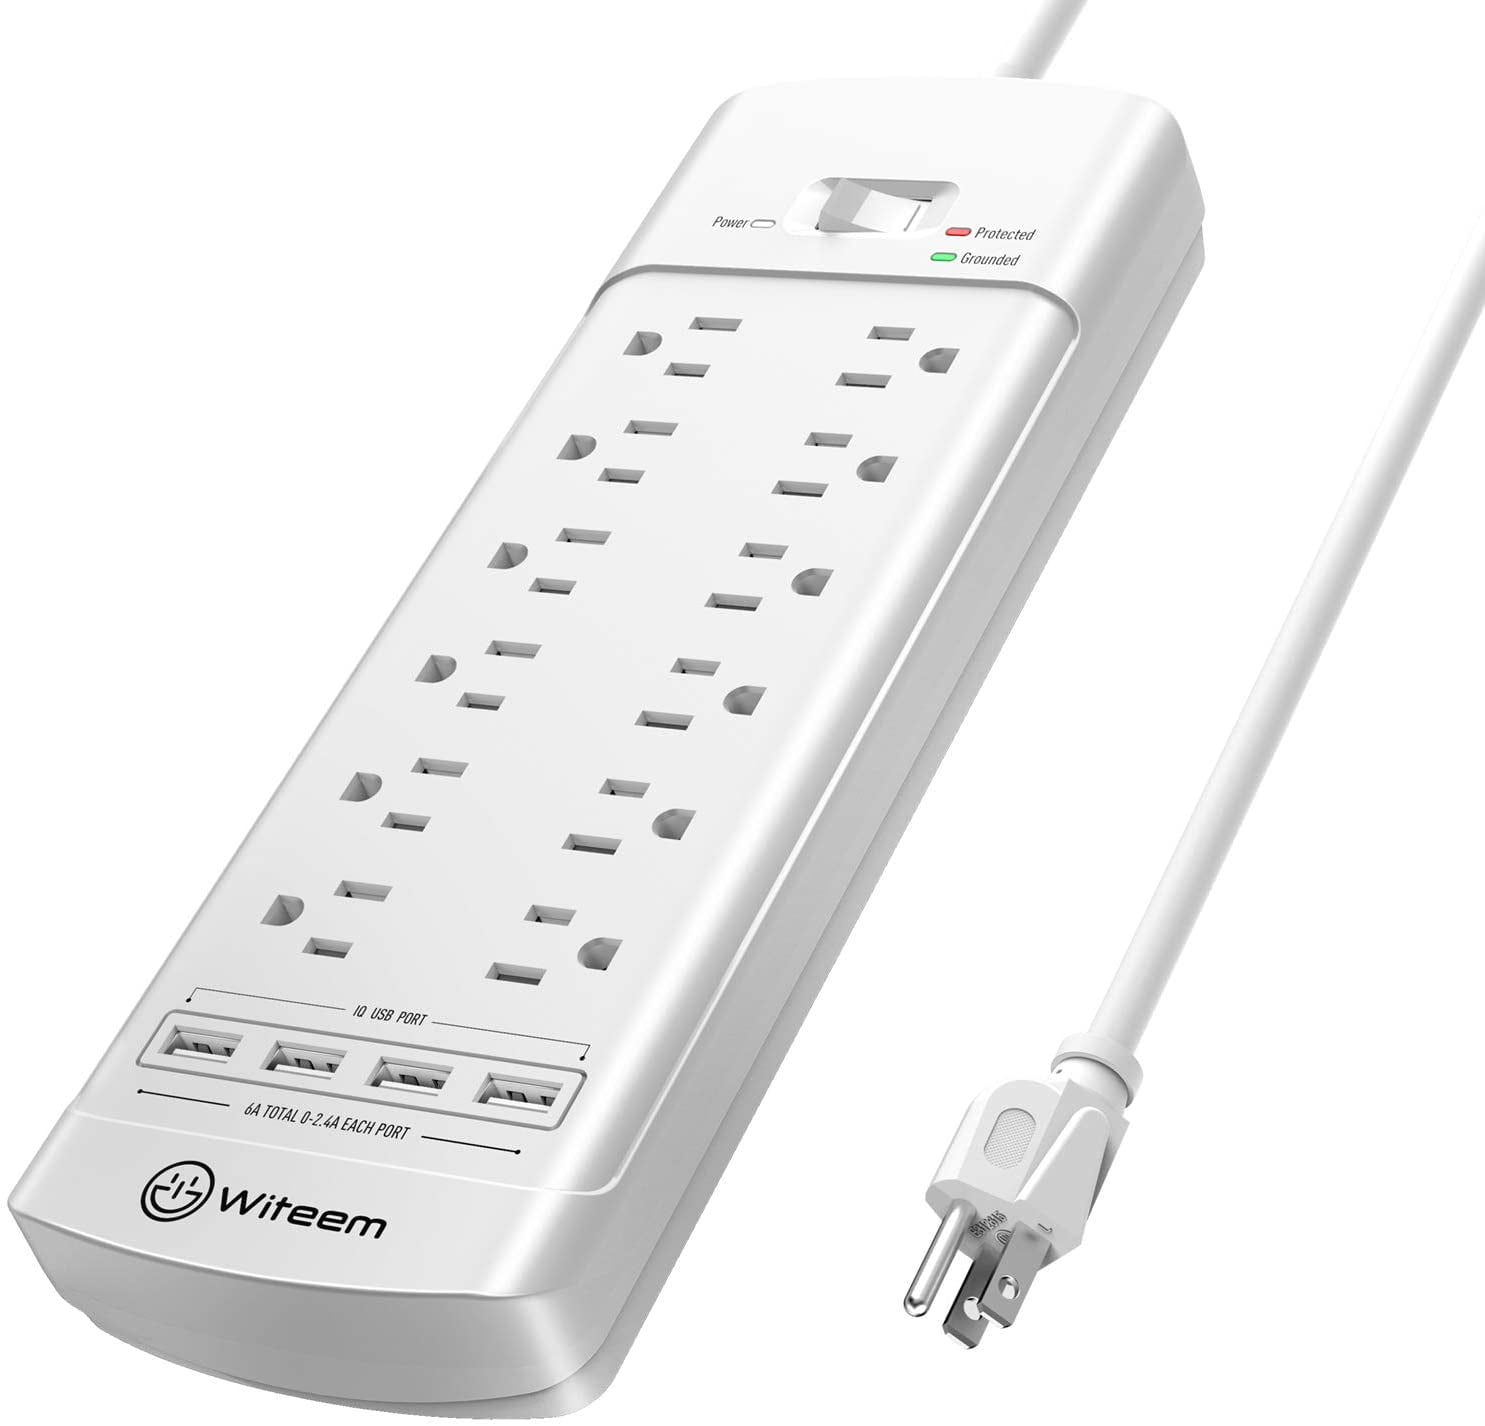 ETL Listed 4360 Joules Surge Protector with USB 1875W/15A 5V/3.4A Witeem 12 Outlets Power Strip and 4 Smart USB Charging Ports 6 Feet Heavy Duty Extension Cord Black Flat Plug 